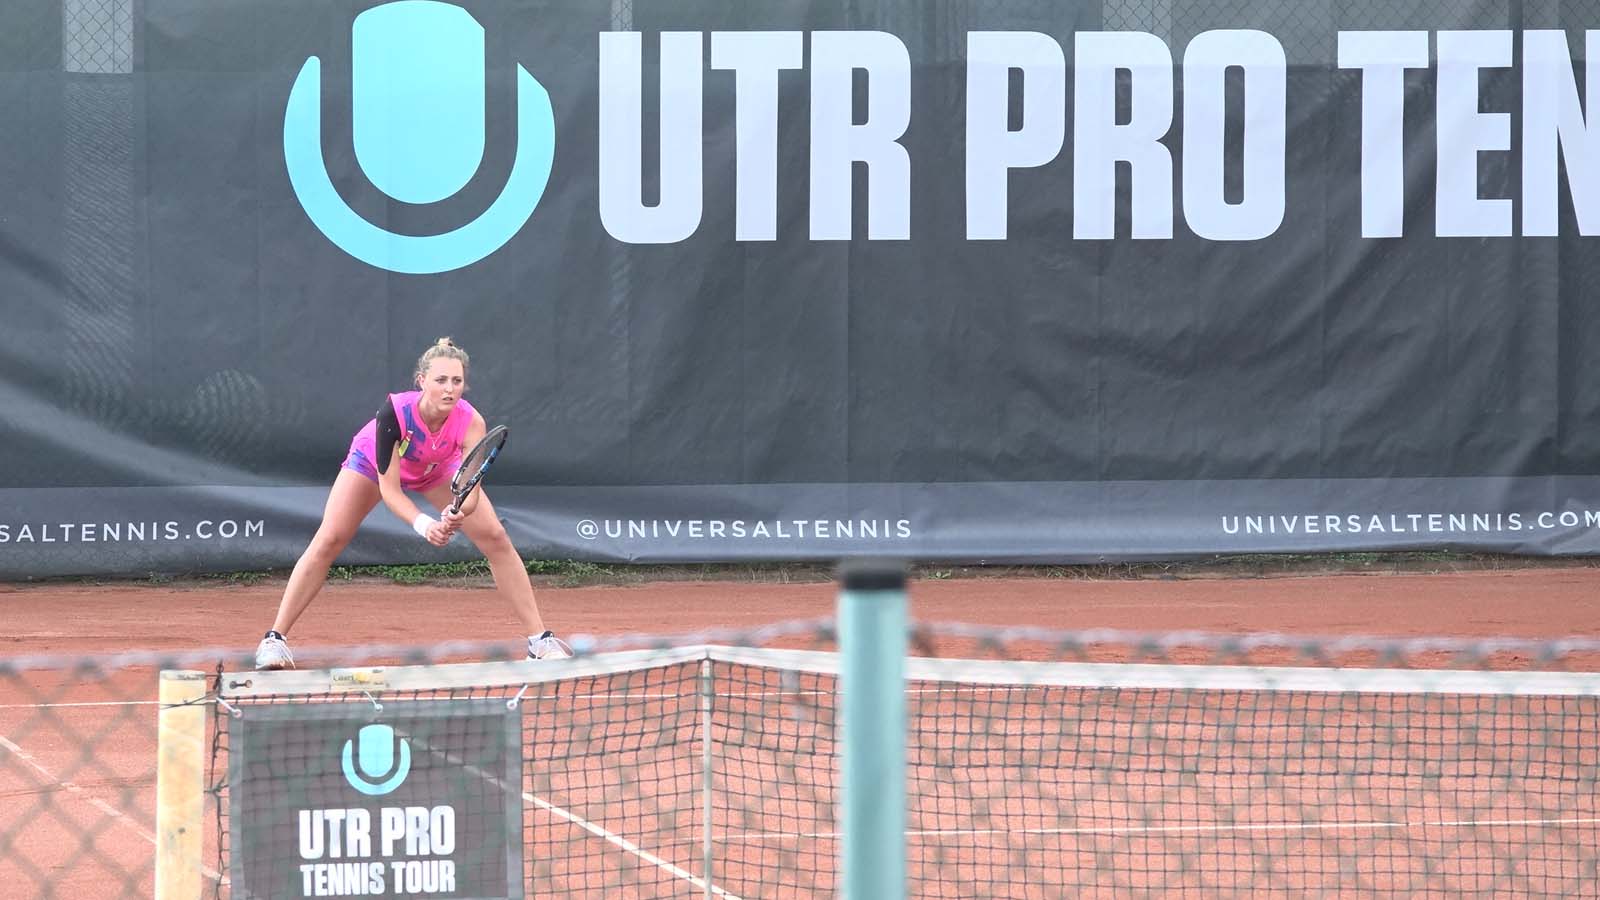 Gabriela Knutson Tests Her Skills on the UTR Pro Tennis Tour Ahead of